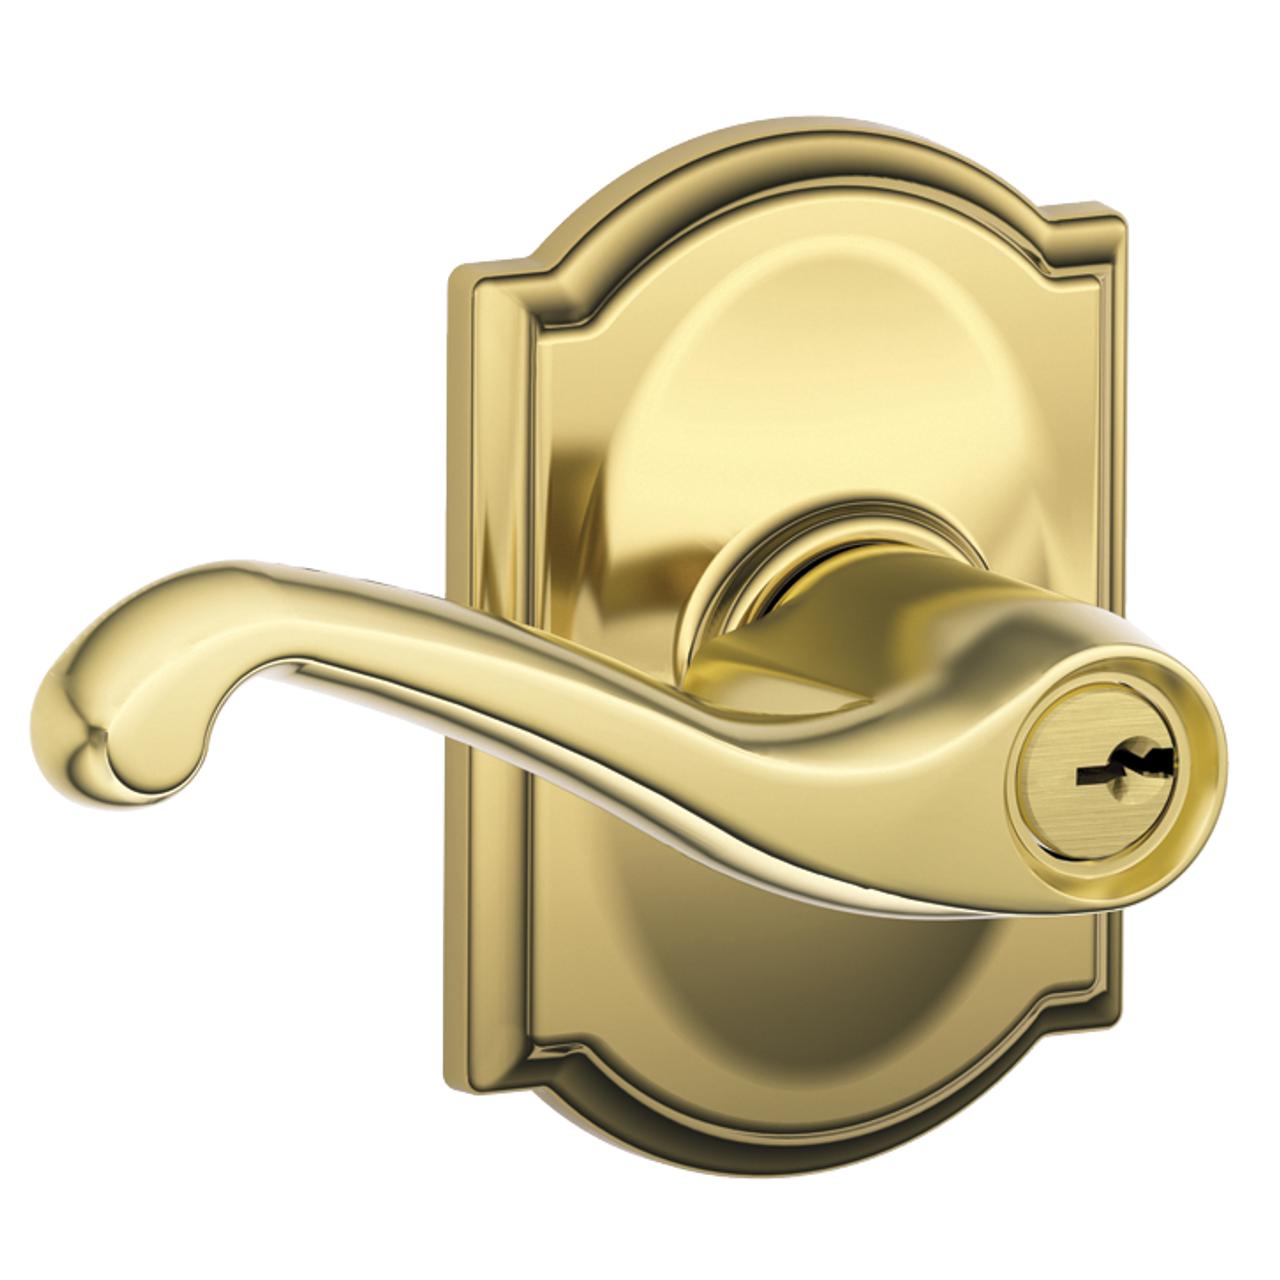 Schlage Keyed Entry Flair Lever Door Lock with Camelot Trim